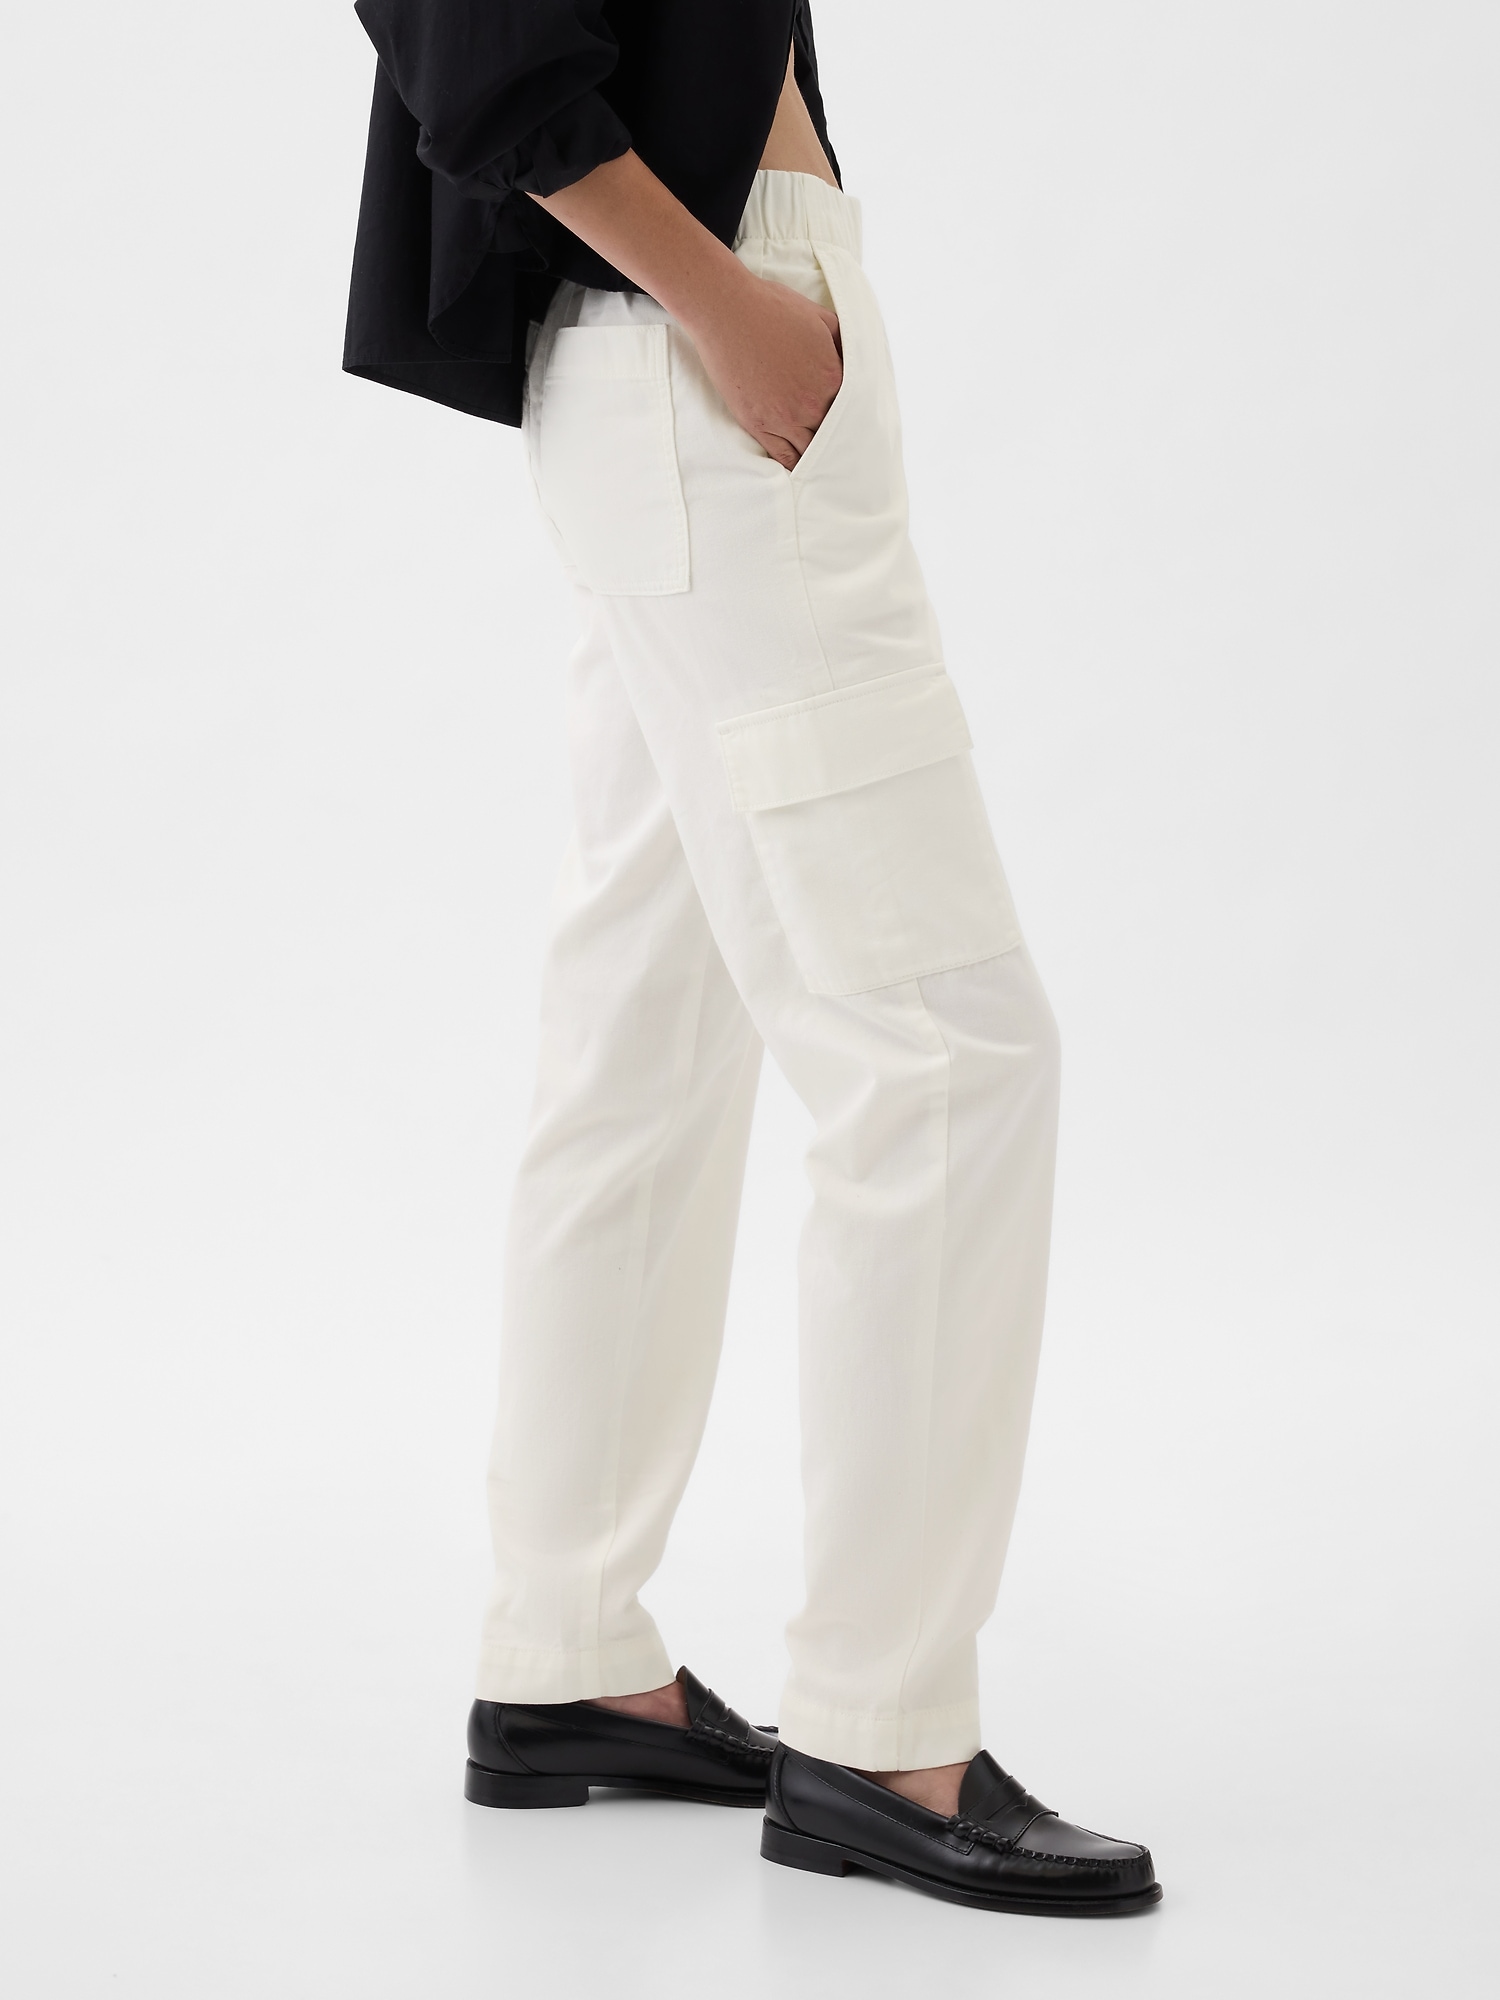 Baggy White Carpenter Cargo Pants - Comfortable and Stylish – Bwolves.com